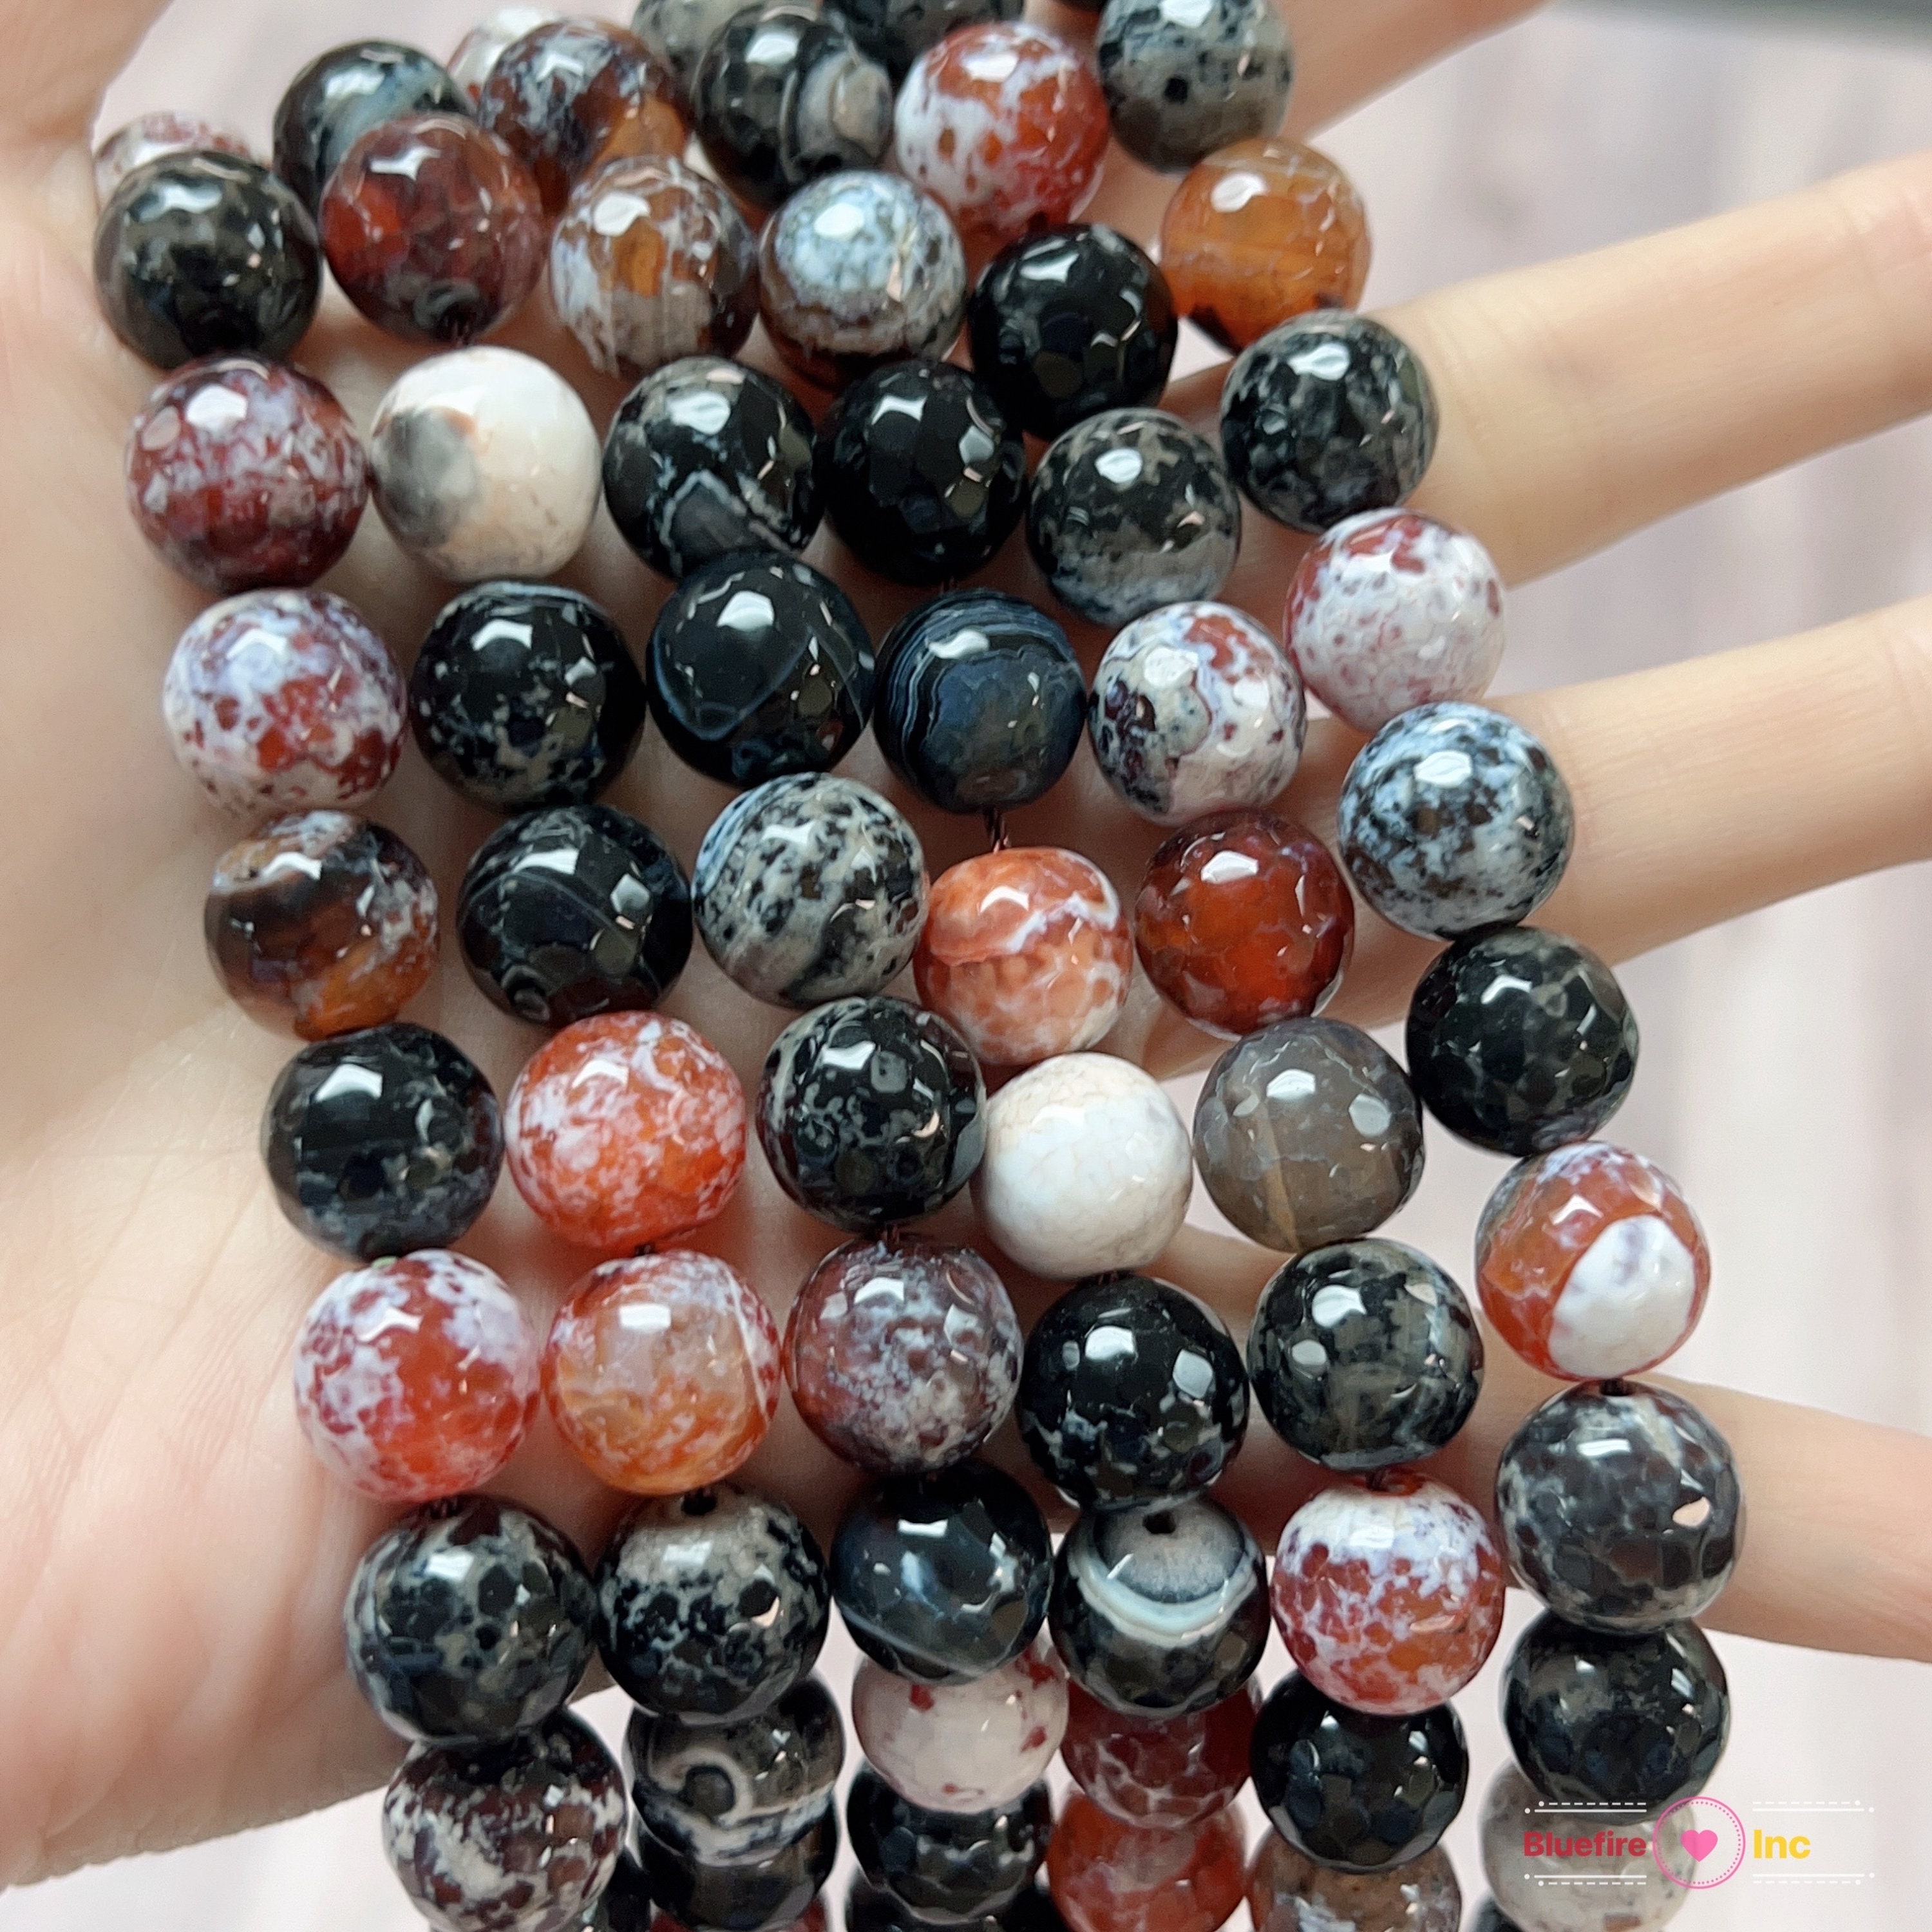 BEADIA Natural Colorful Agate Stone Round Loose Semi Gemstone Beads for Jewelry Making 3-35mm 38cmStrand, Stone